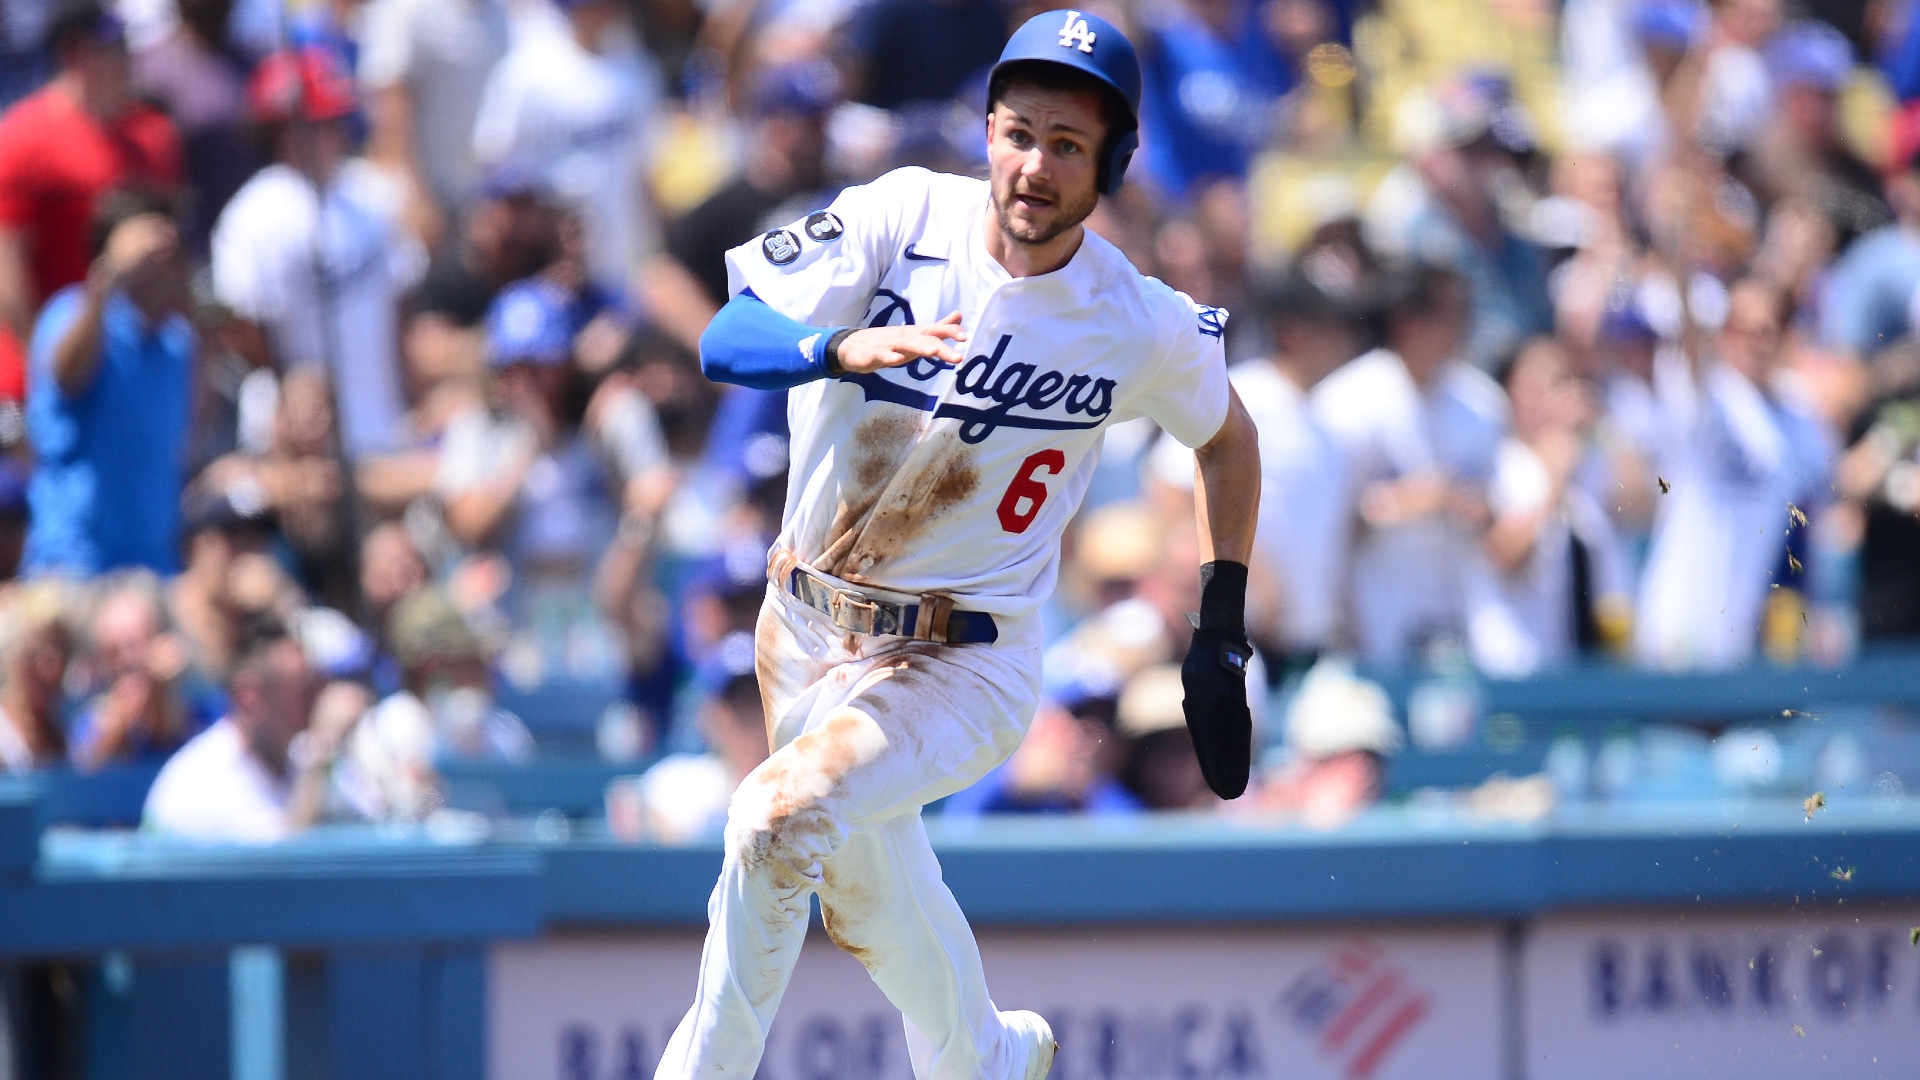 Dodgers Twitter hilariously reacted to Trea Turner scoring from first base Sports Washington